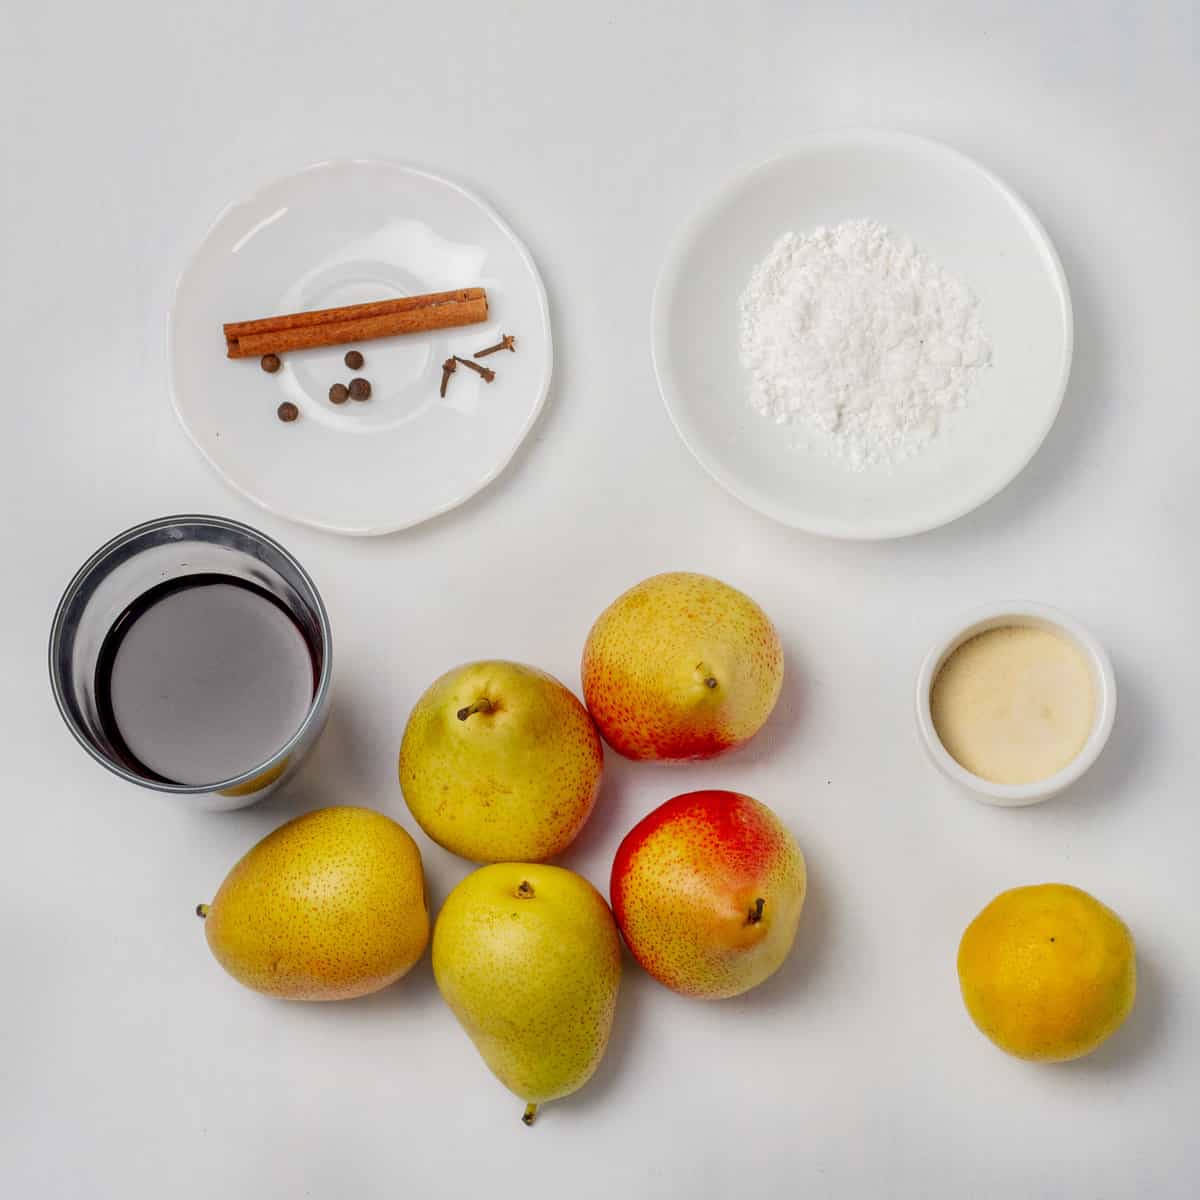 Whole pears, stevia, cinnamon sticks, spices, and red wine ingredients in separate dishes.